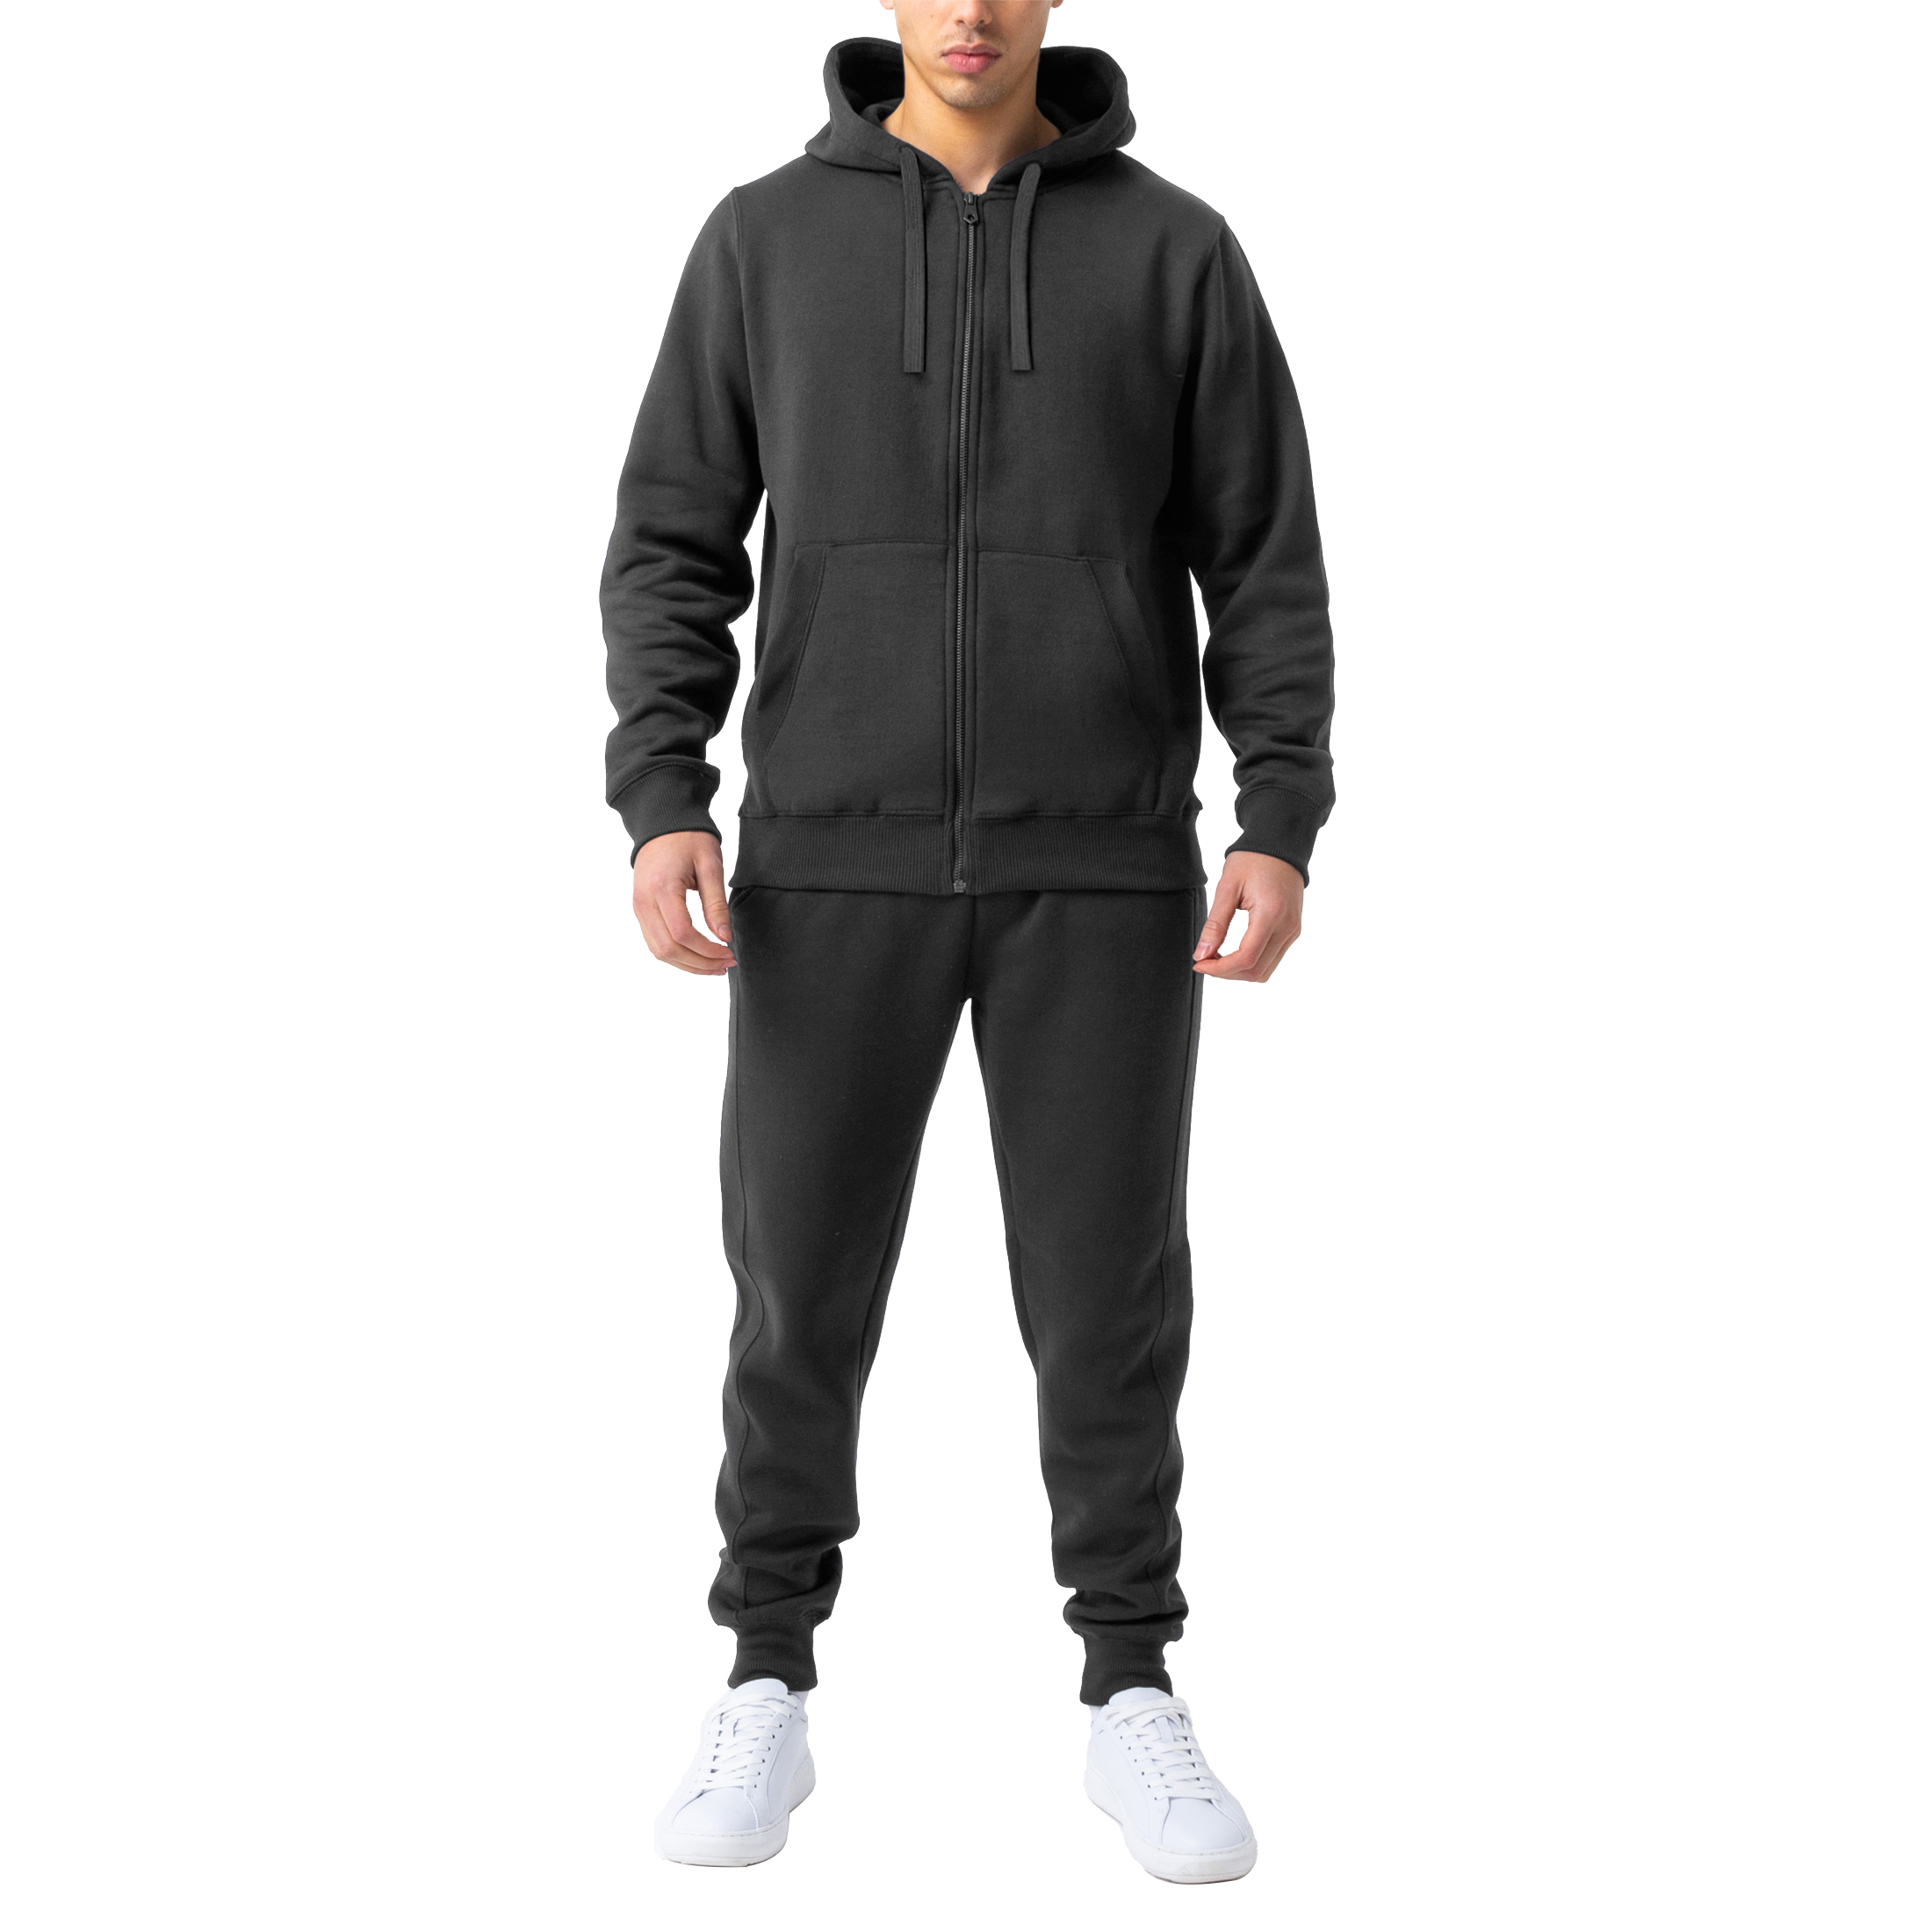 Men's Casual Jogging Athletic Active Full Zip Up Tracksuit - Charcoal, 4X-Large